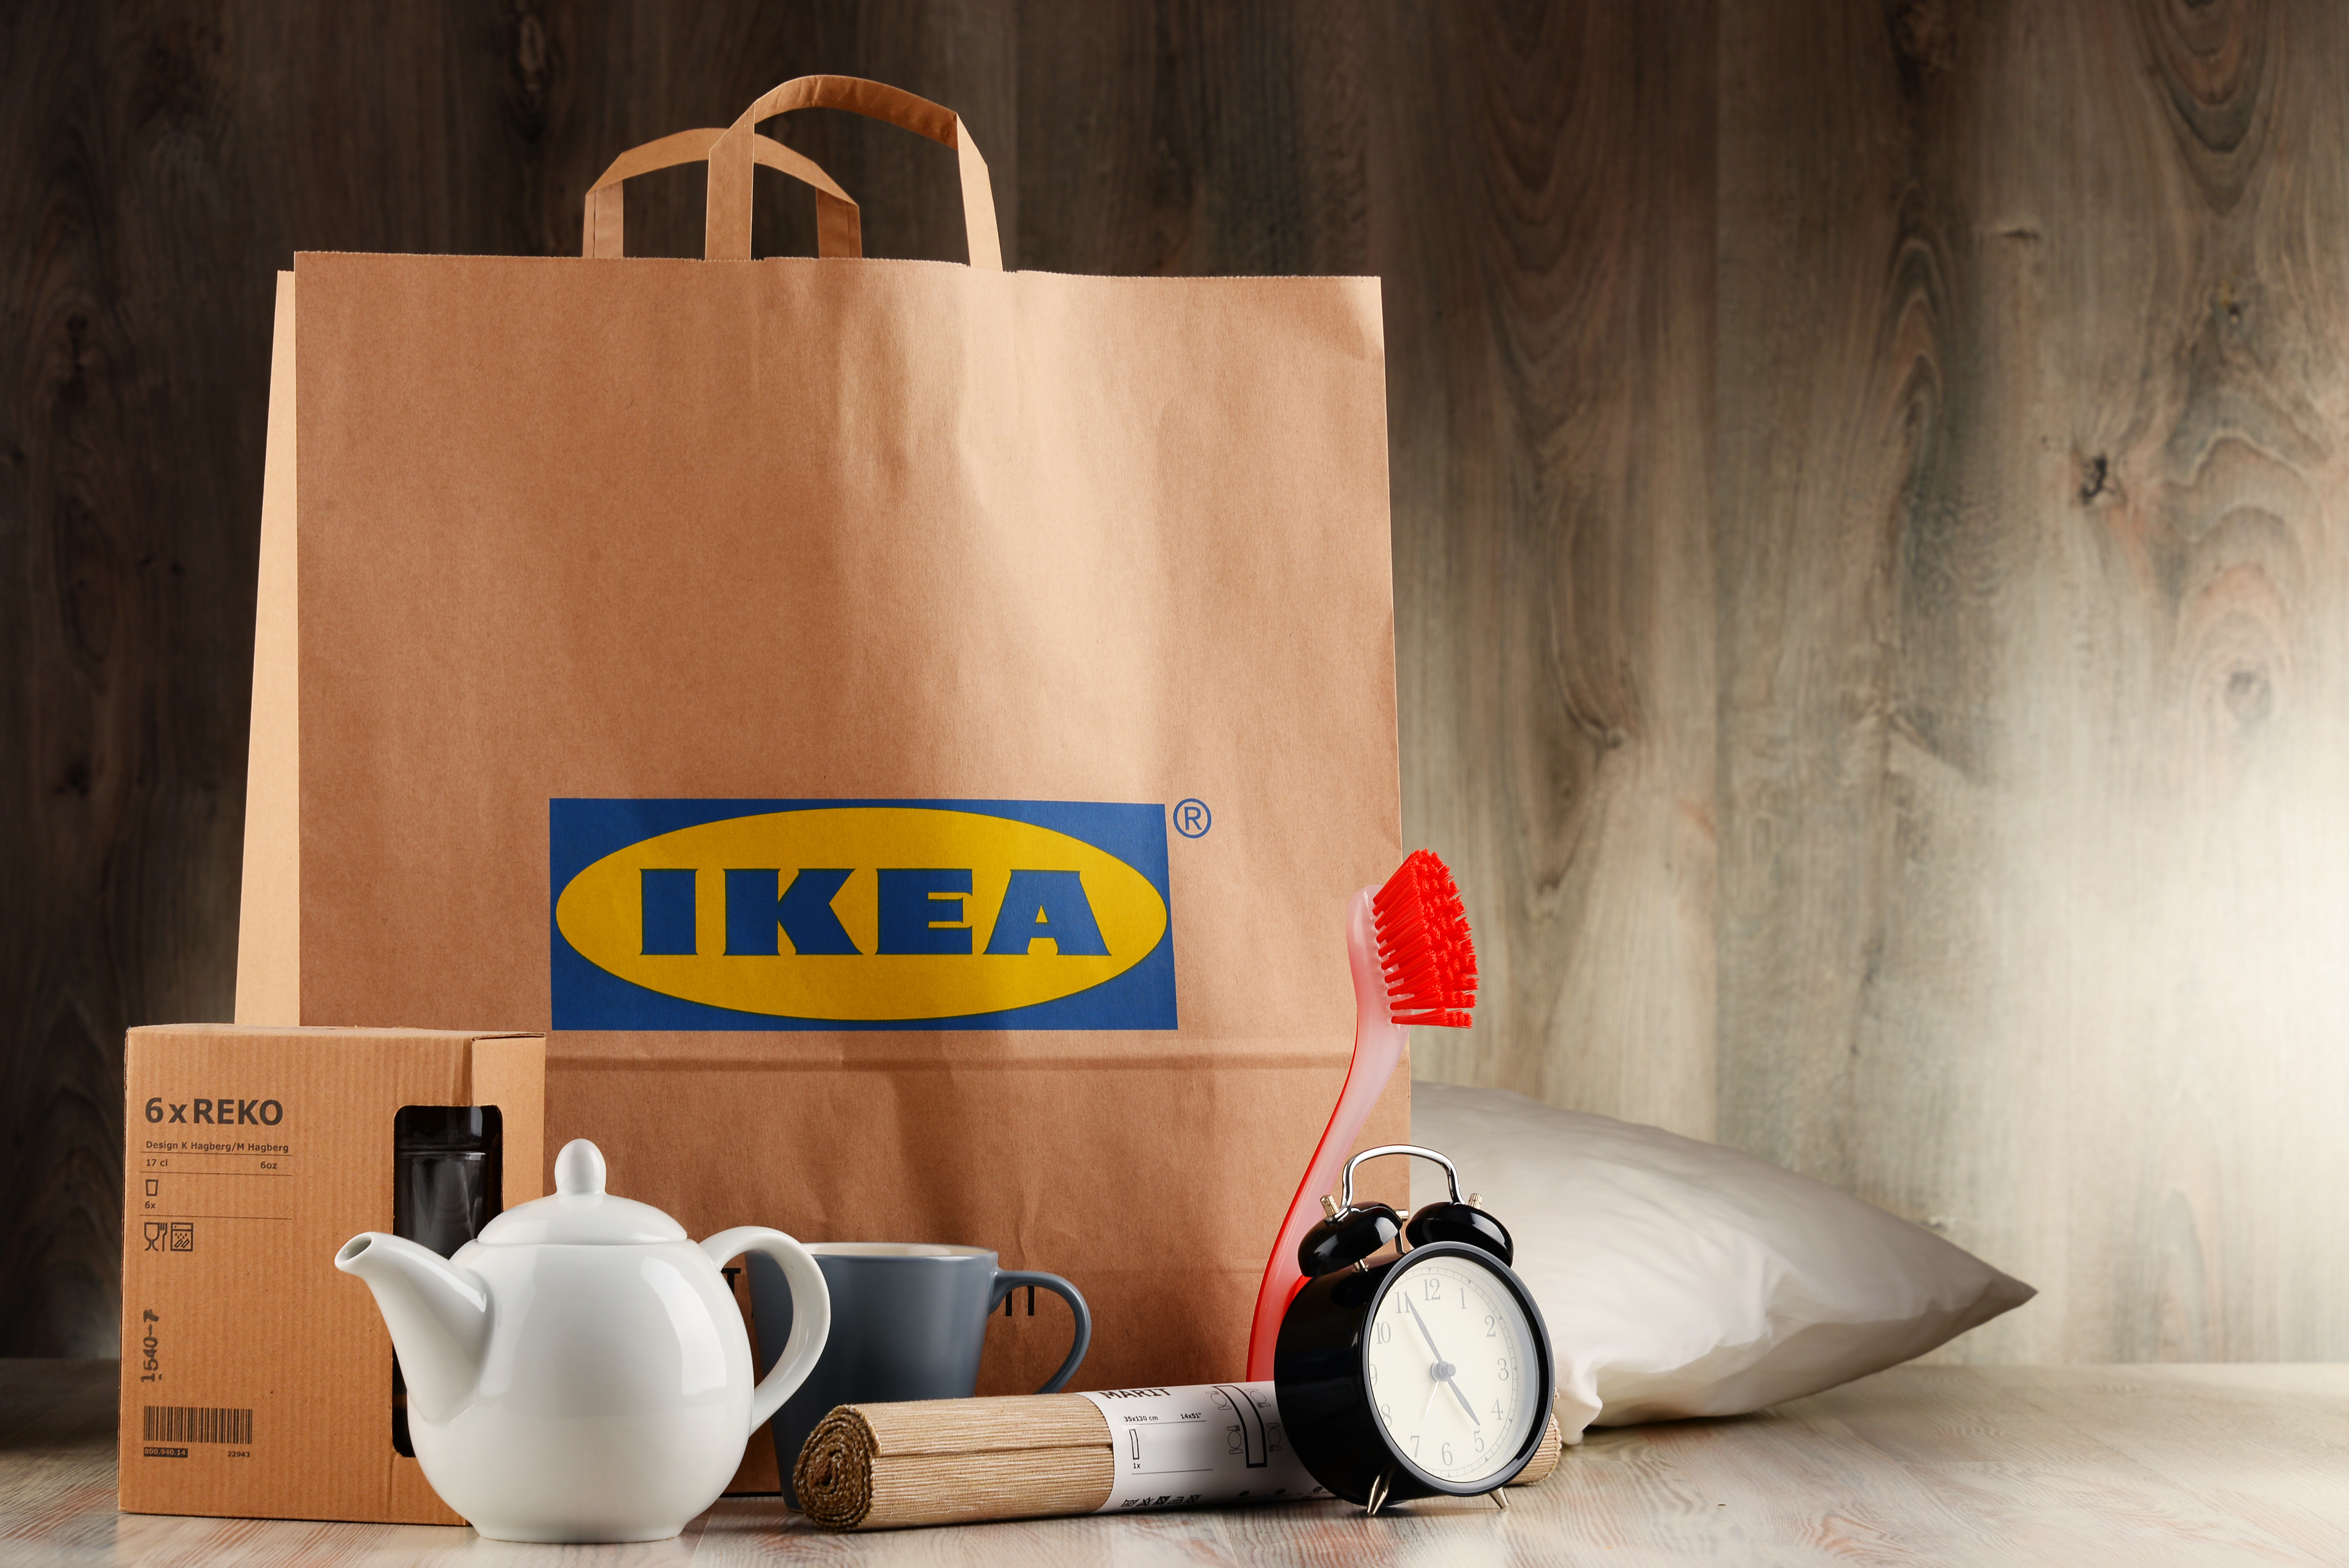 Paper bag with the IKEA logo on it next to a collection of household items